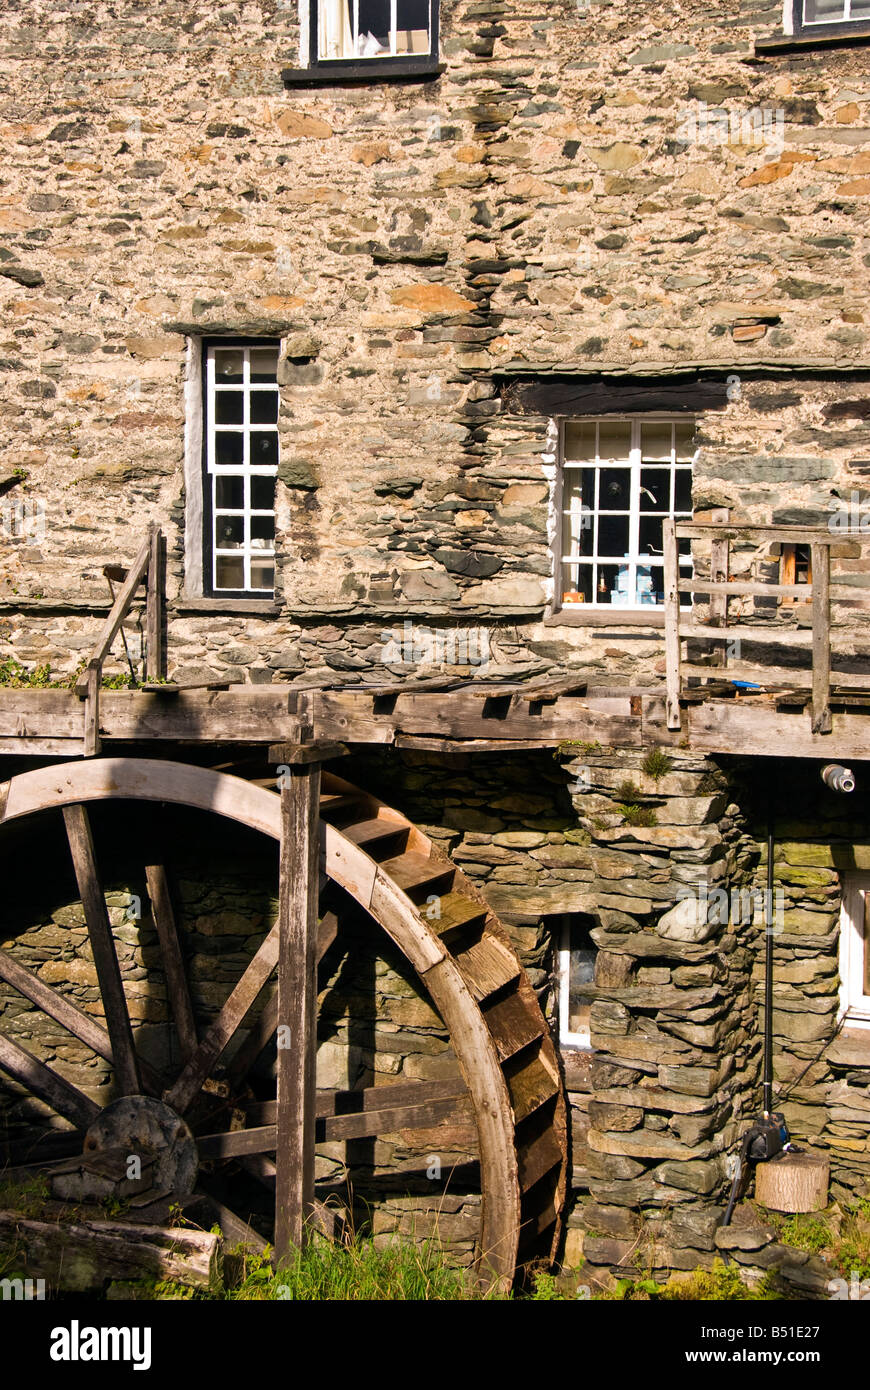 Lake District National Park UK ambleside Old Mill Water wheel one of the town's major attractions Stock Photo